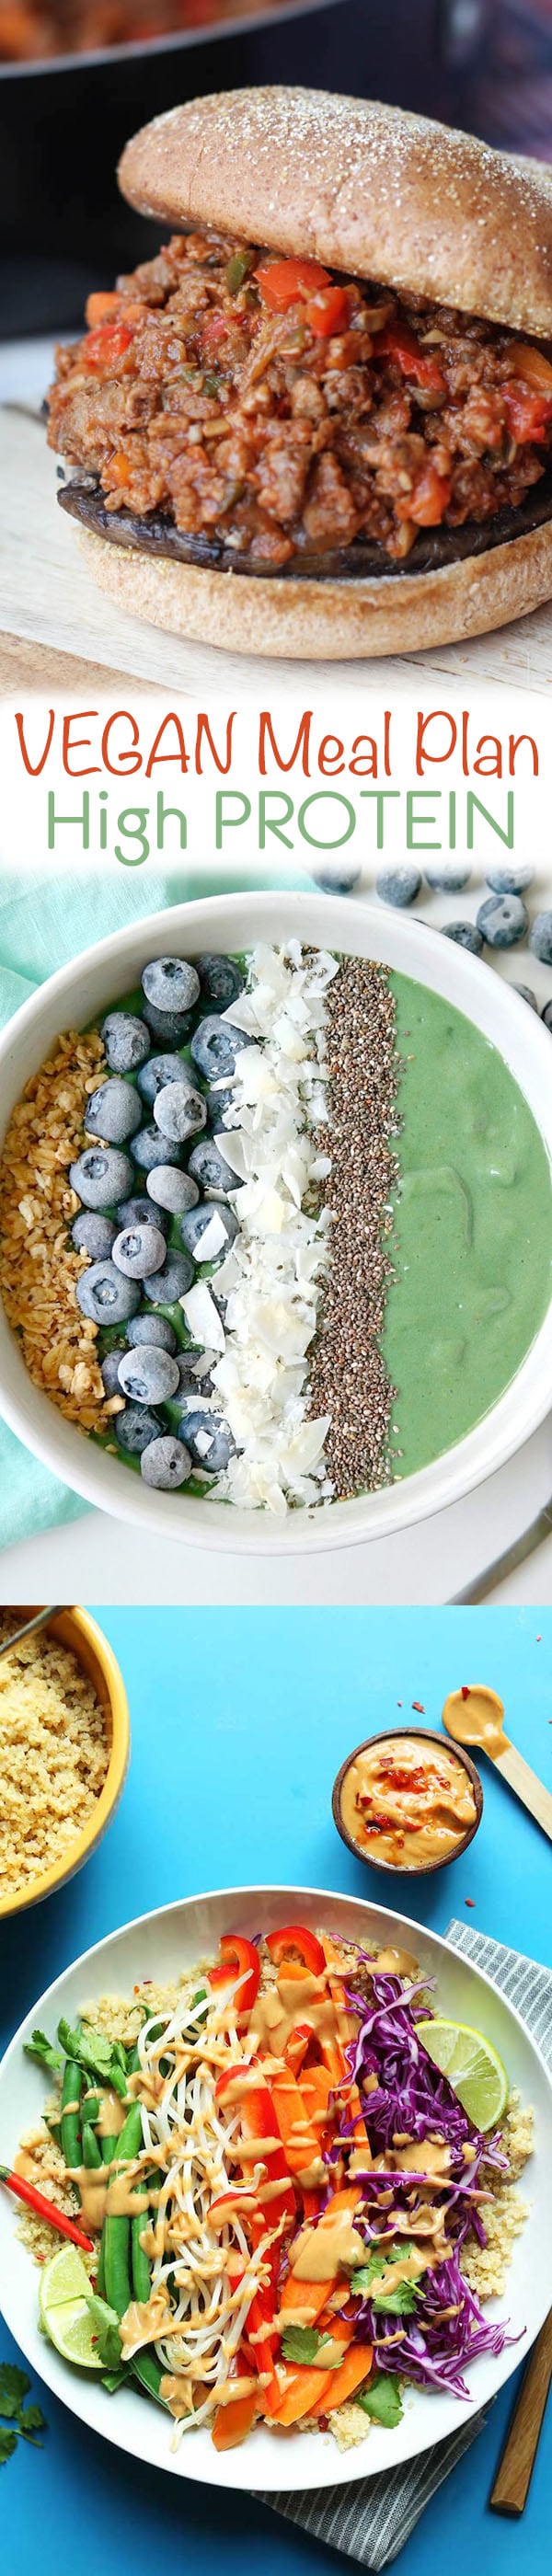 A green smoothie bowl with chia seeds, coconut, and blurberries.